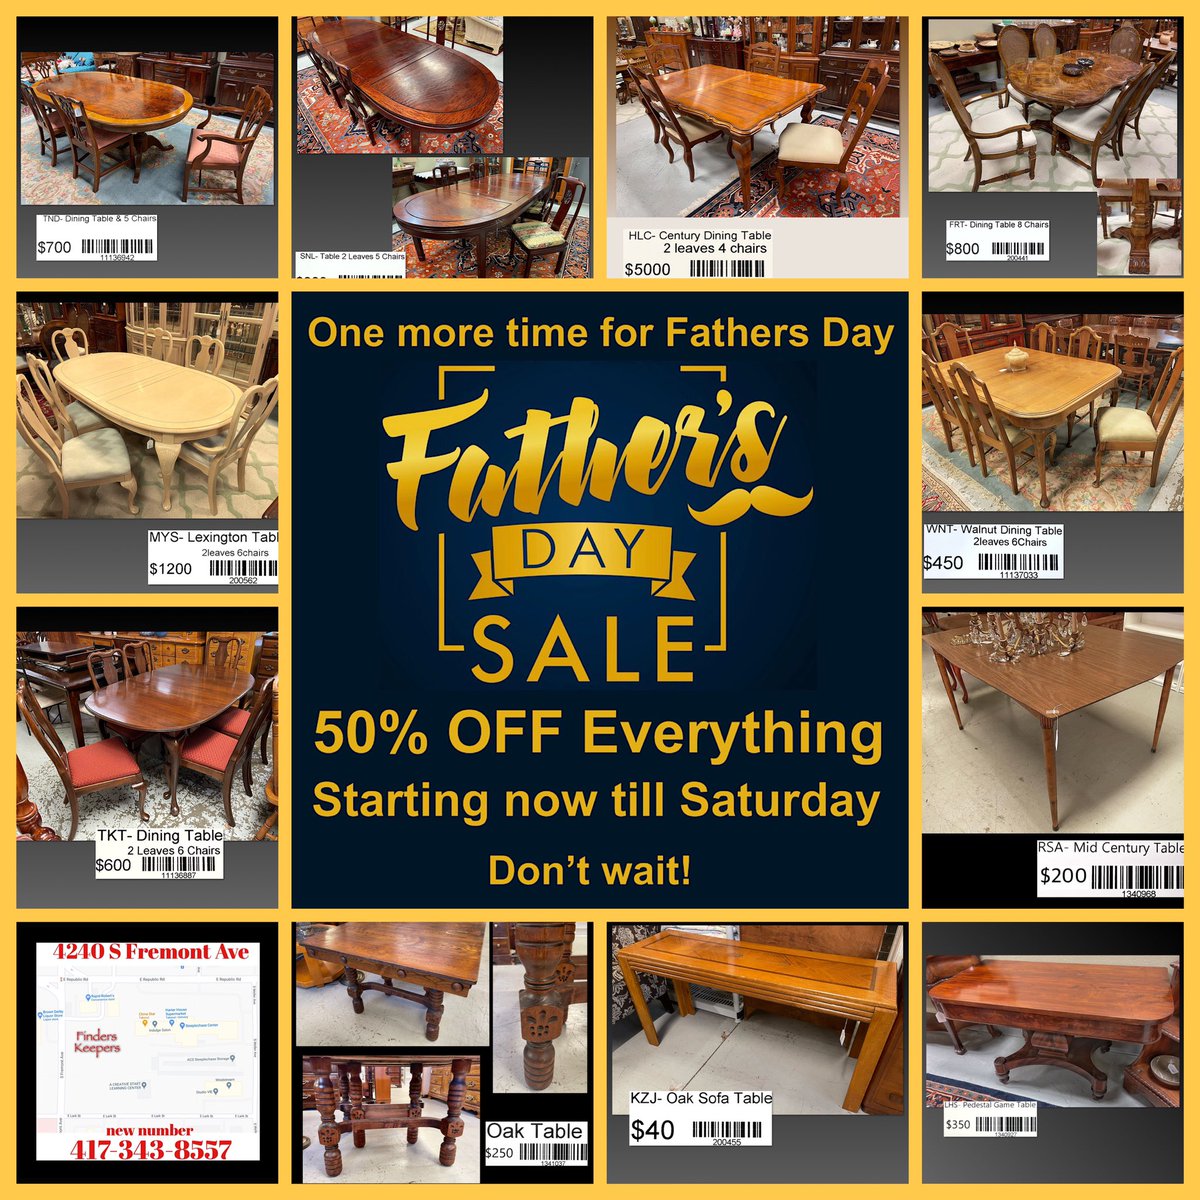 🆕🏷️We got a really nice dining table in and one more time for Fathers Day 50% OFF everything till Saturday 17th. #antique #antiques #vintage #homefurnishings #furnishings #springfieldmissouri #finderskeepers #consignment #furniture #glassware #artwork